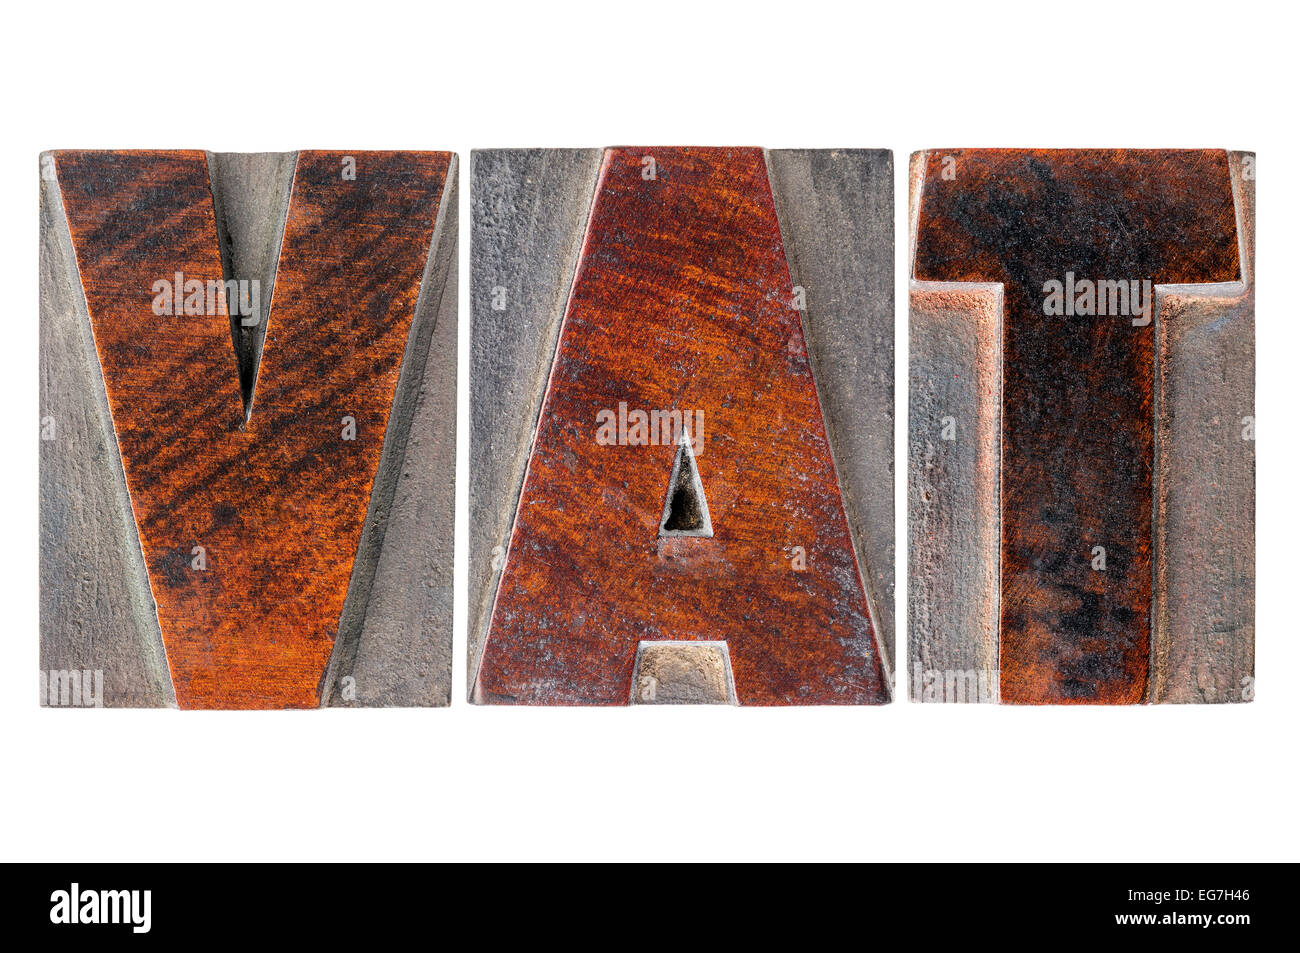 VAT (value added tax) - text in isolated letterpress wood type printing blocks Stock Photo